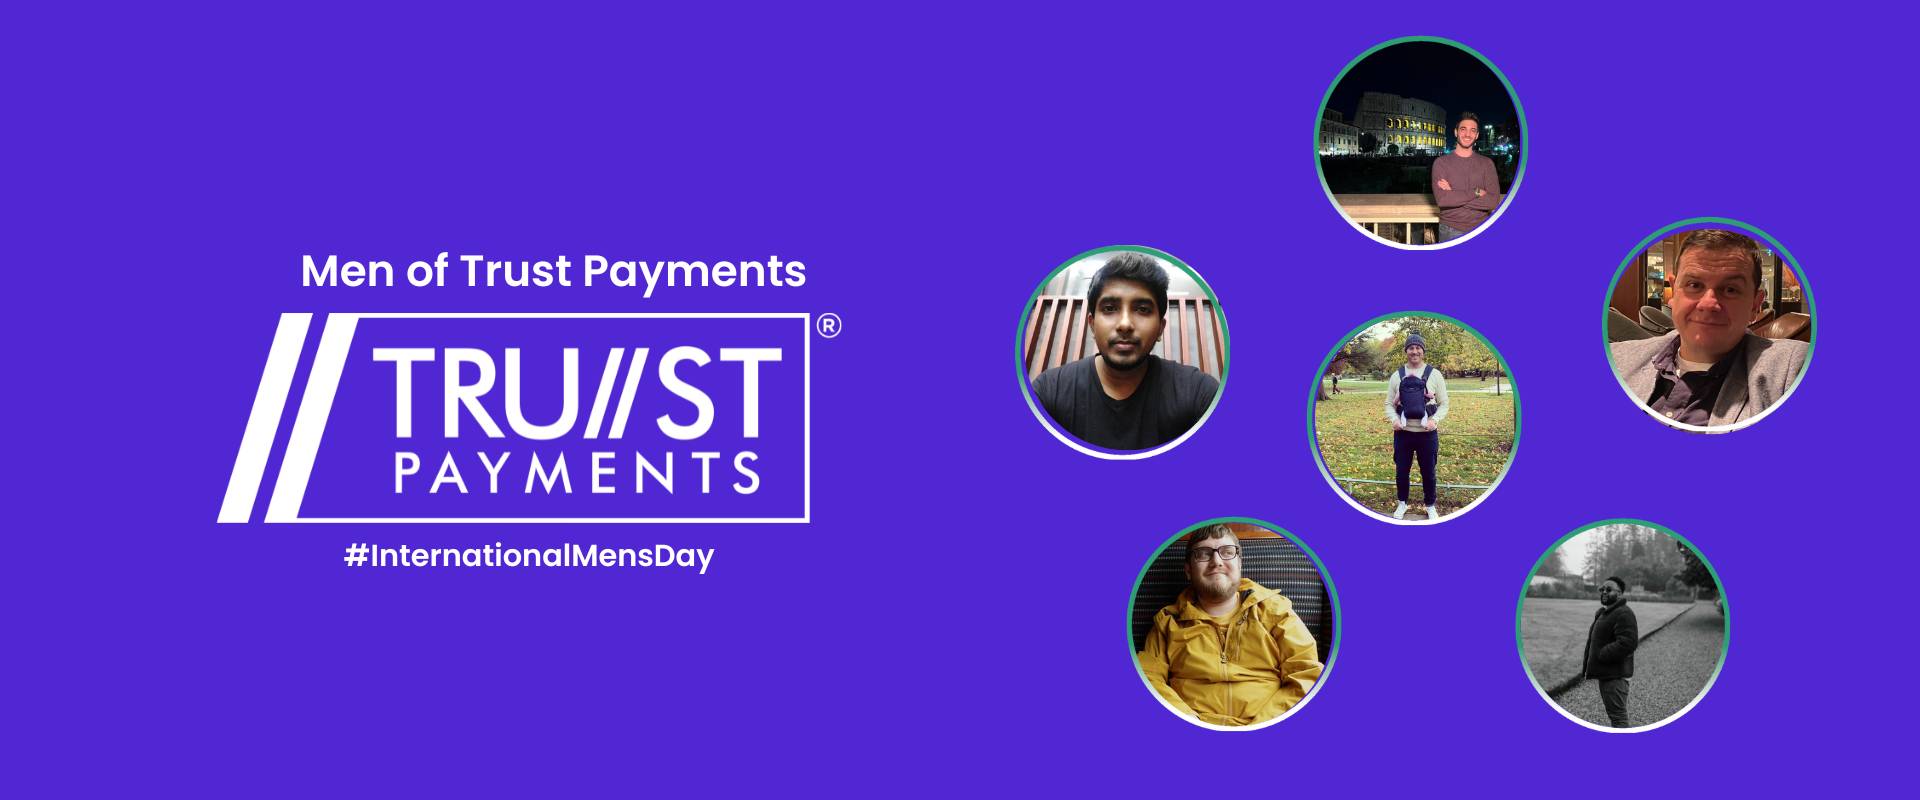 Introducing the Men of Trust Payments – International Men’s Day